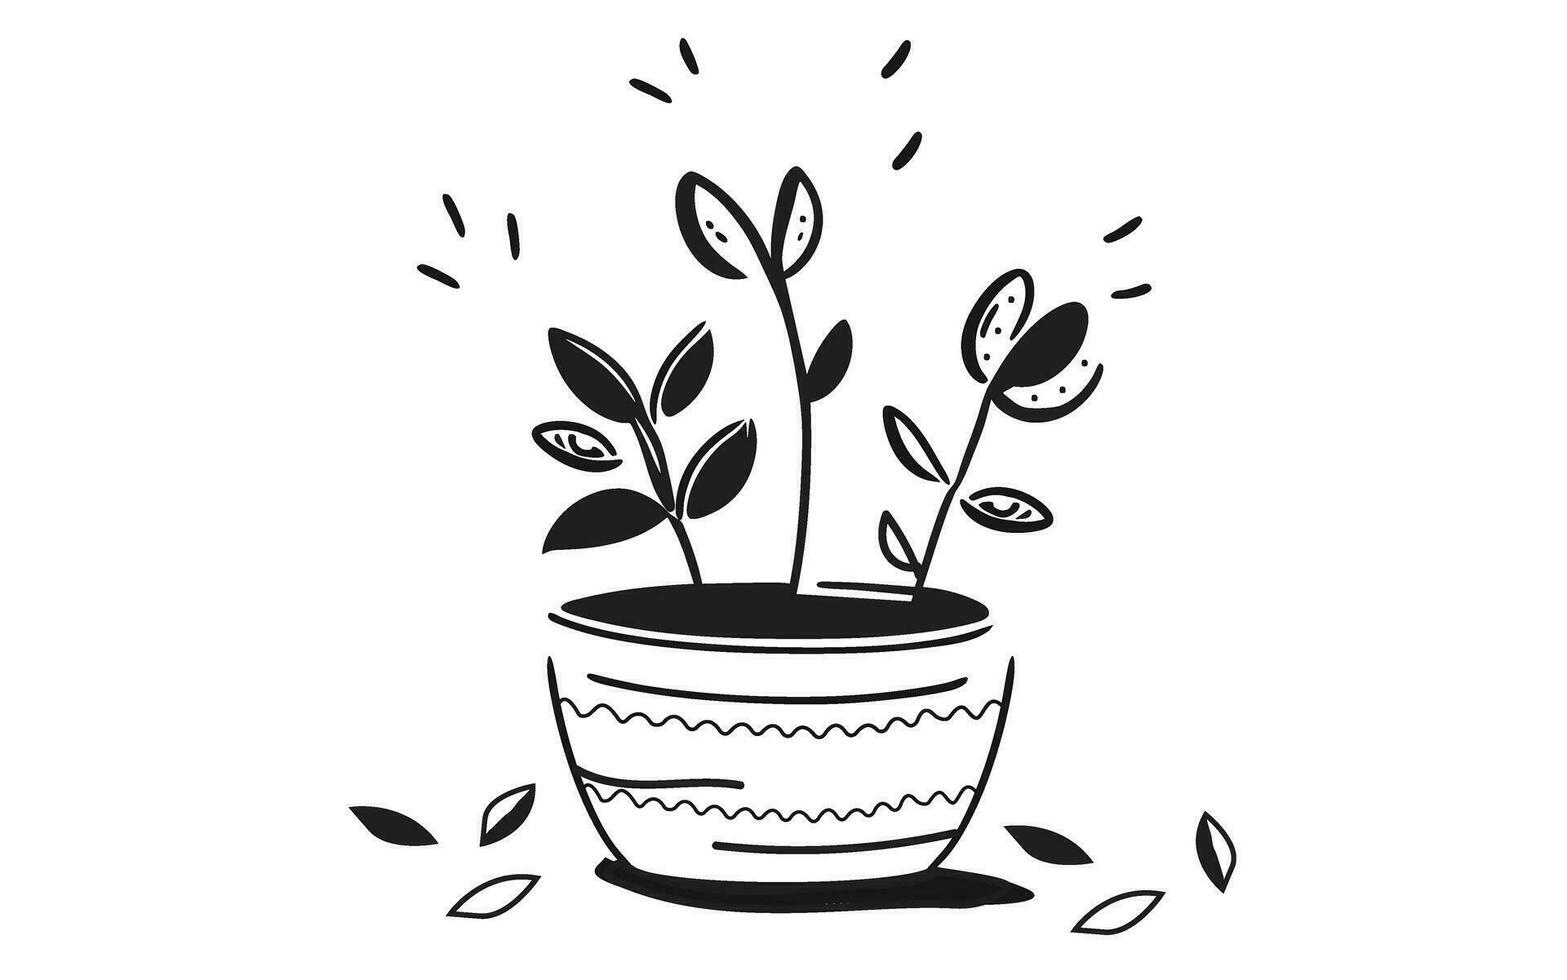 potted plant vector illustration, hand drawn, in doodle style ,on isolated white background